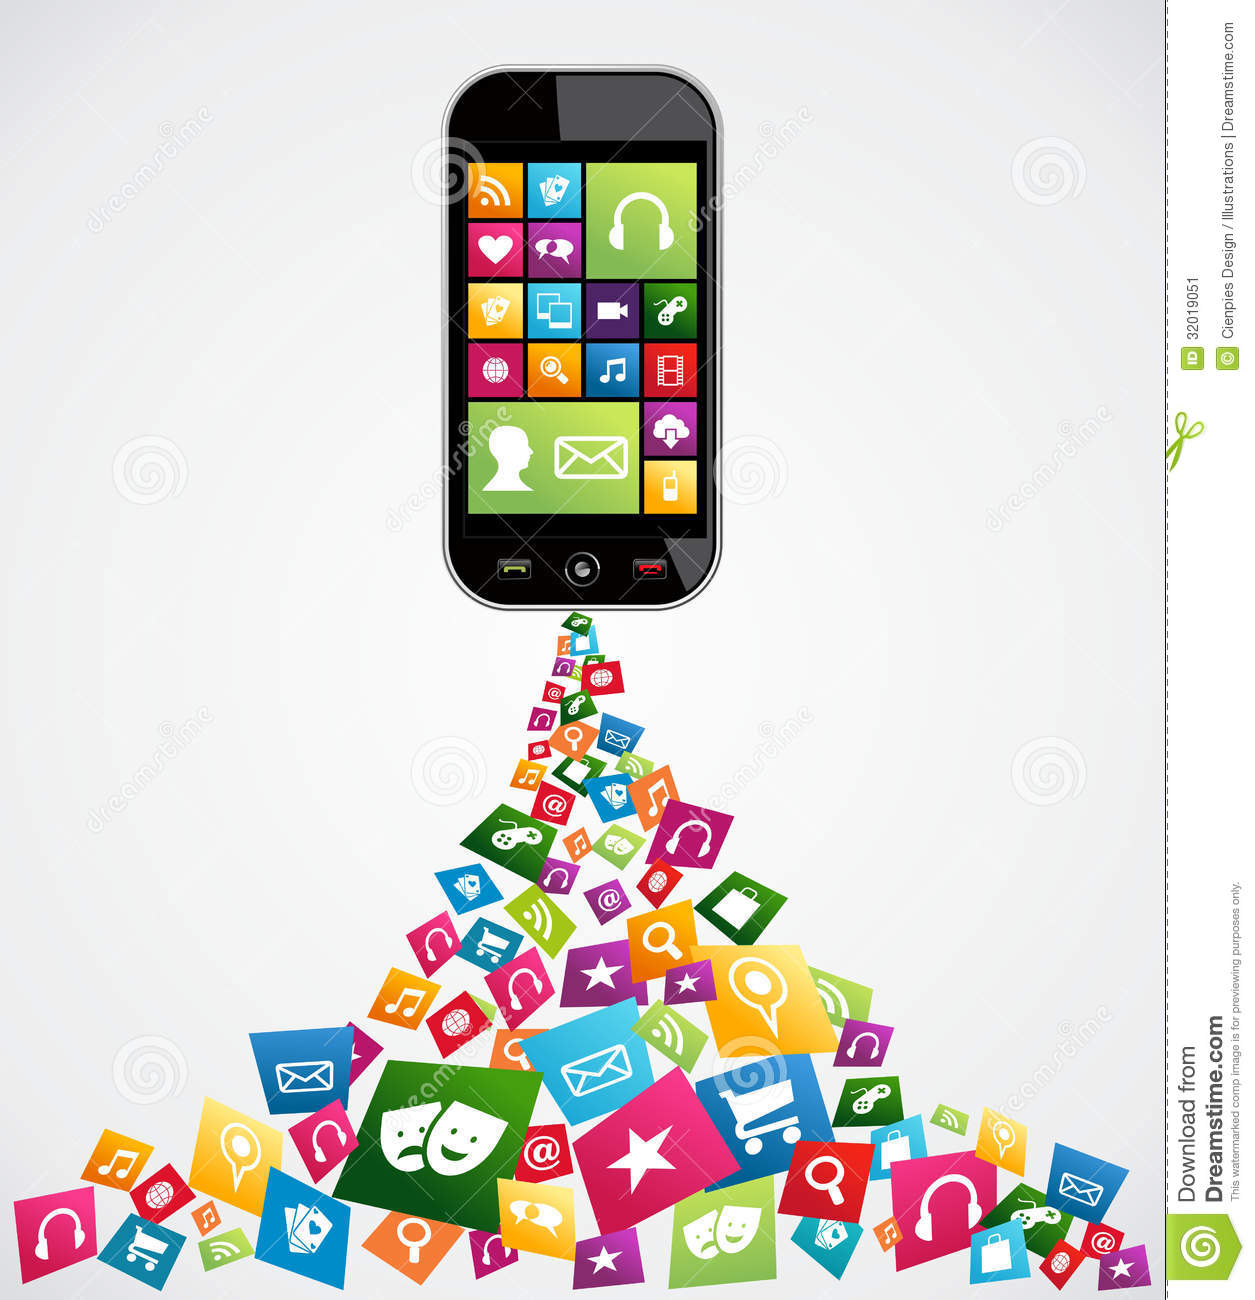 Mobile Computer Applications Mobile App View Original[Updated on